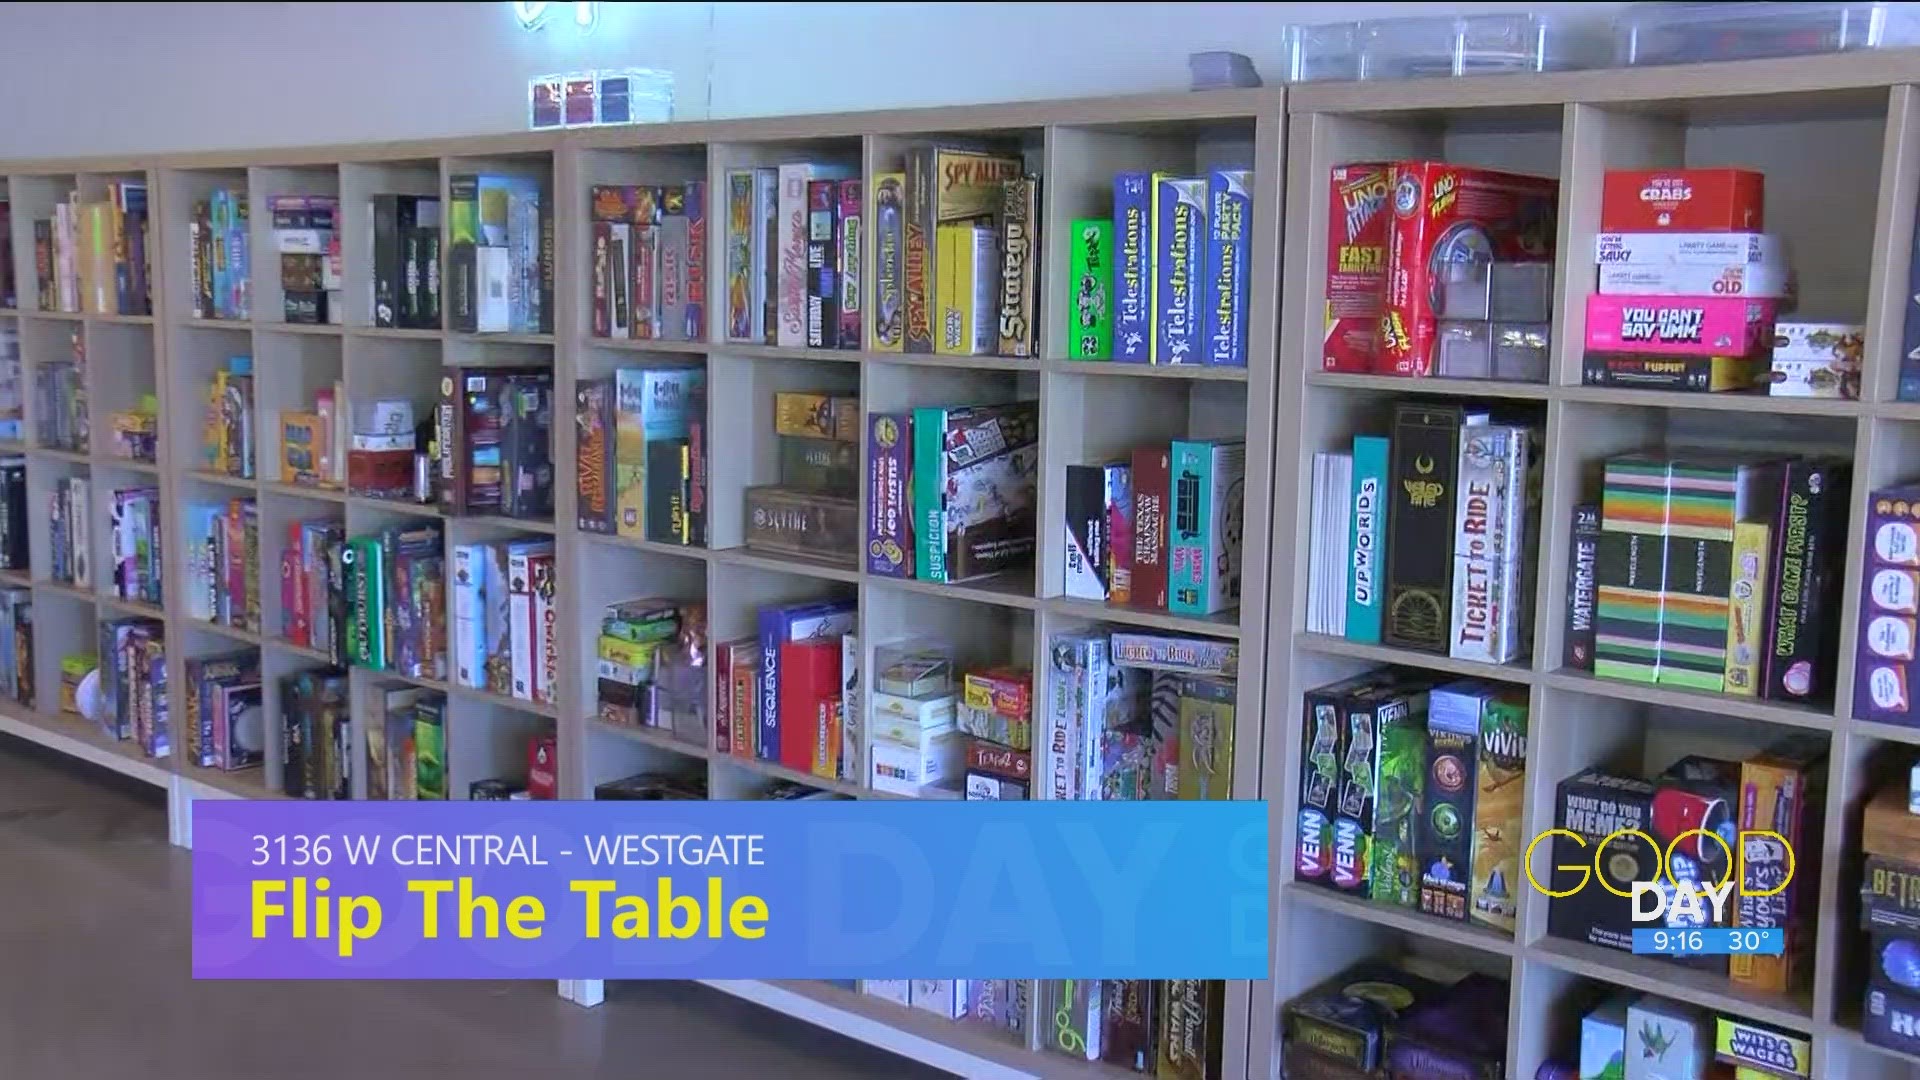 Tiffany from 'Flip the Table' at Westgate talks 'Flip the Table', a new business where you can play board games with friends.